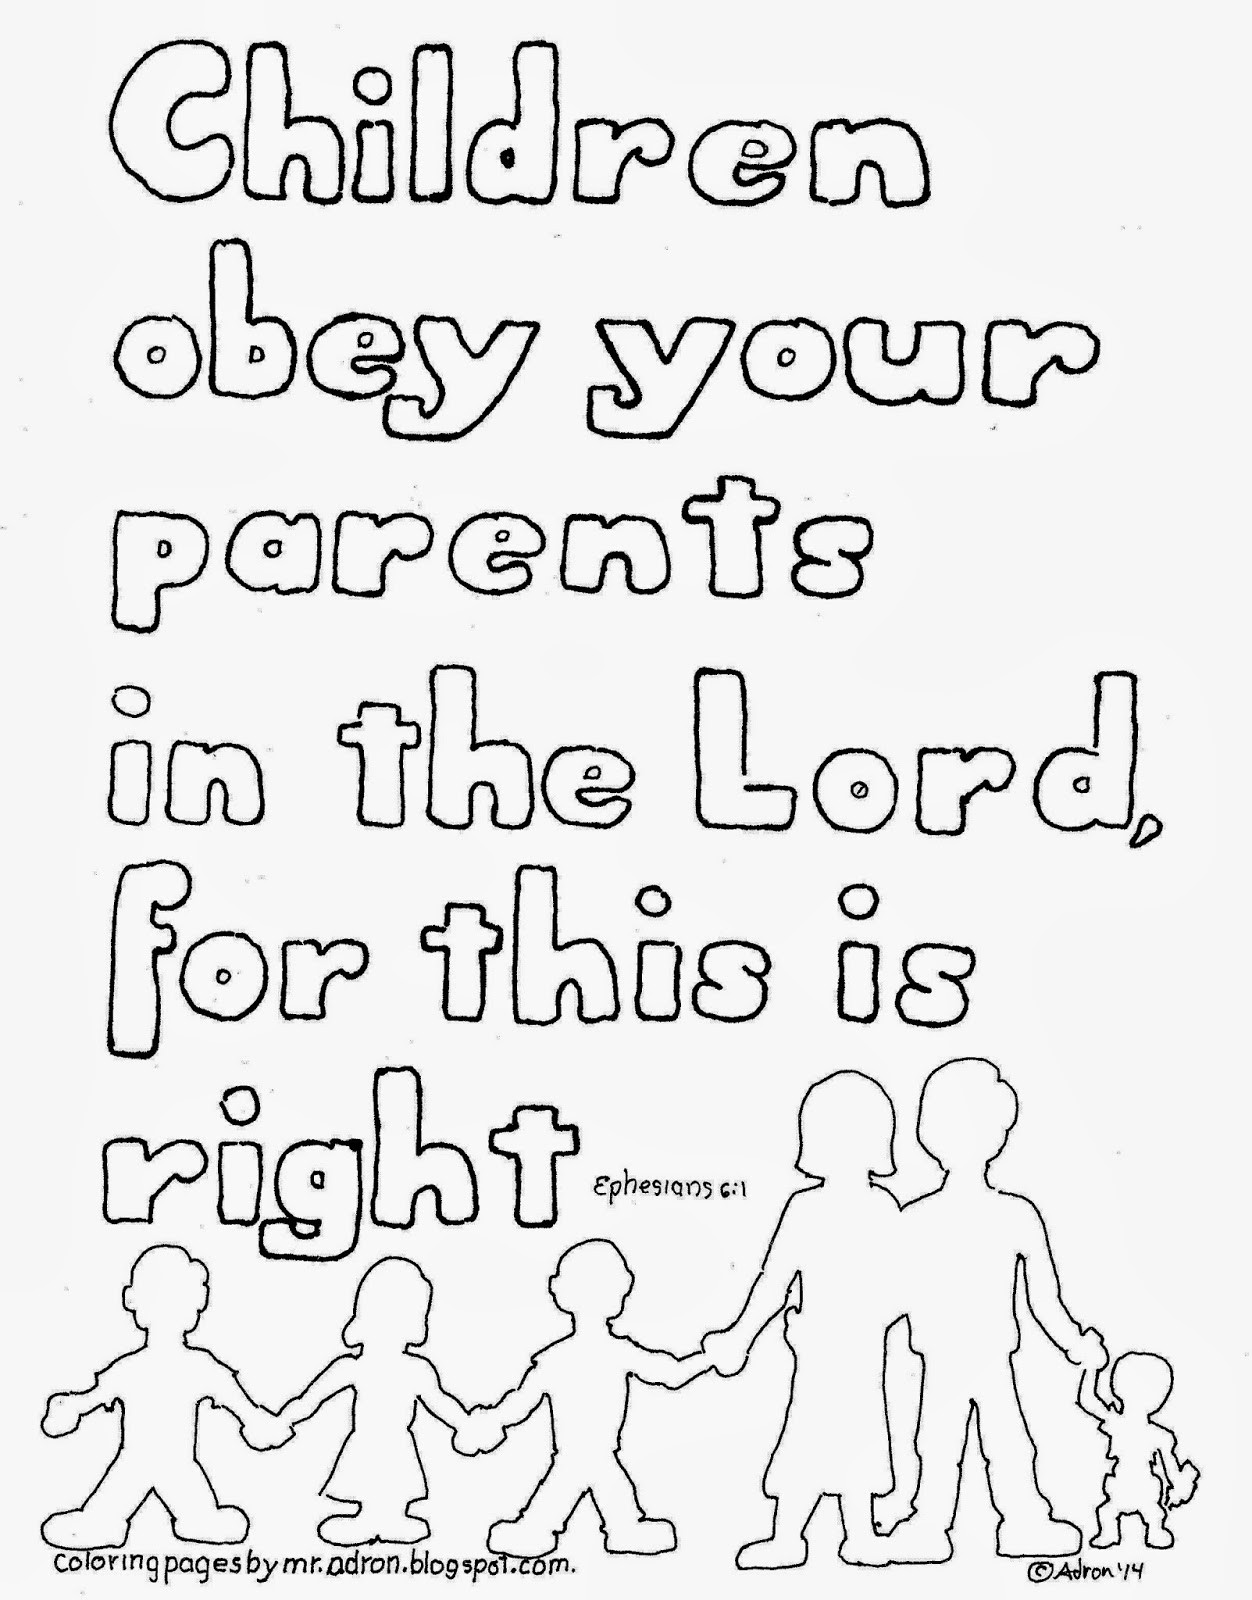 Children Obey Your Parents Coloring Page
 Coloring Pages for Kids by Mr Adron Children Obey Your